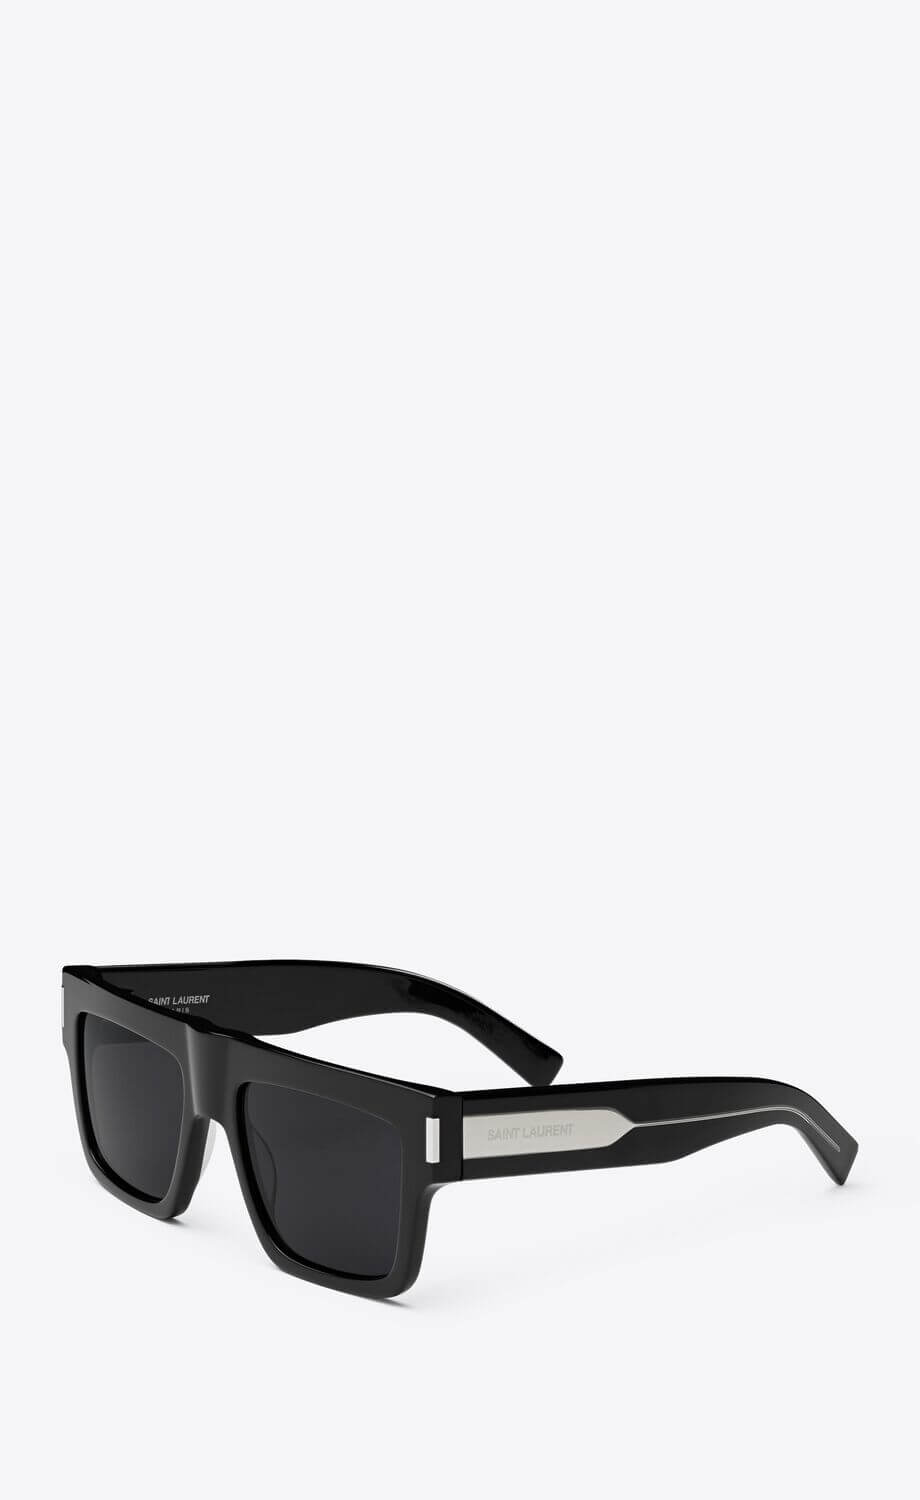 Saint Laurent Flat-Top Thick Square Sunglasses available at The New Trend Australia.